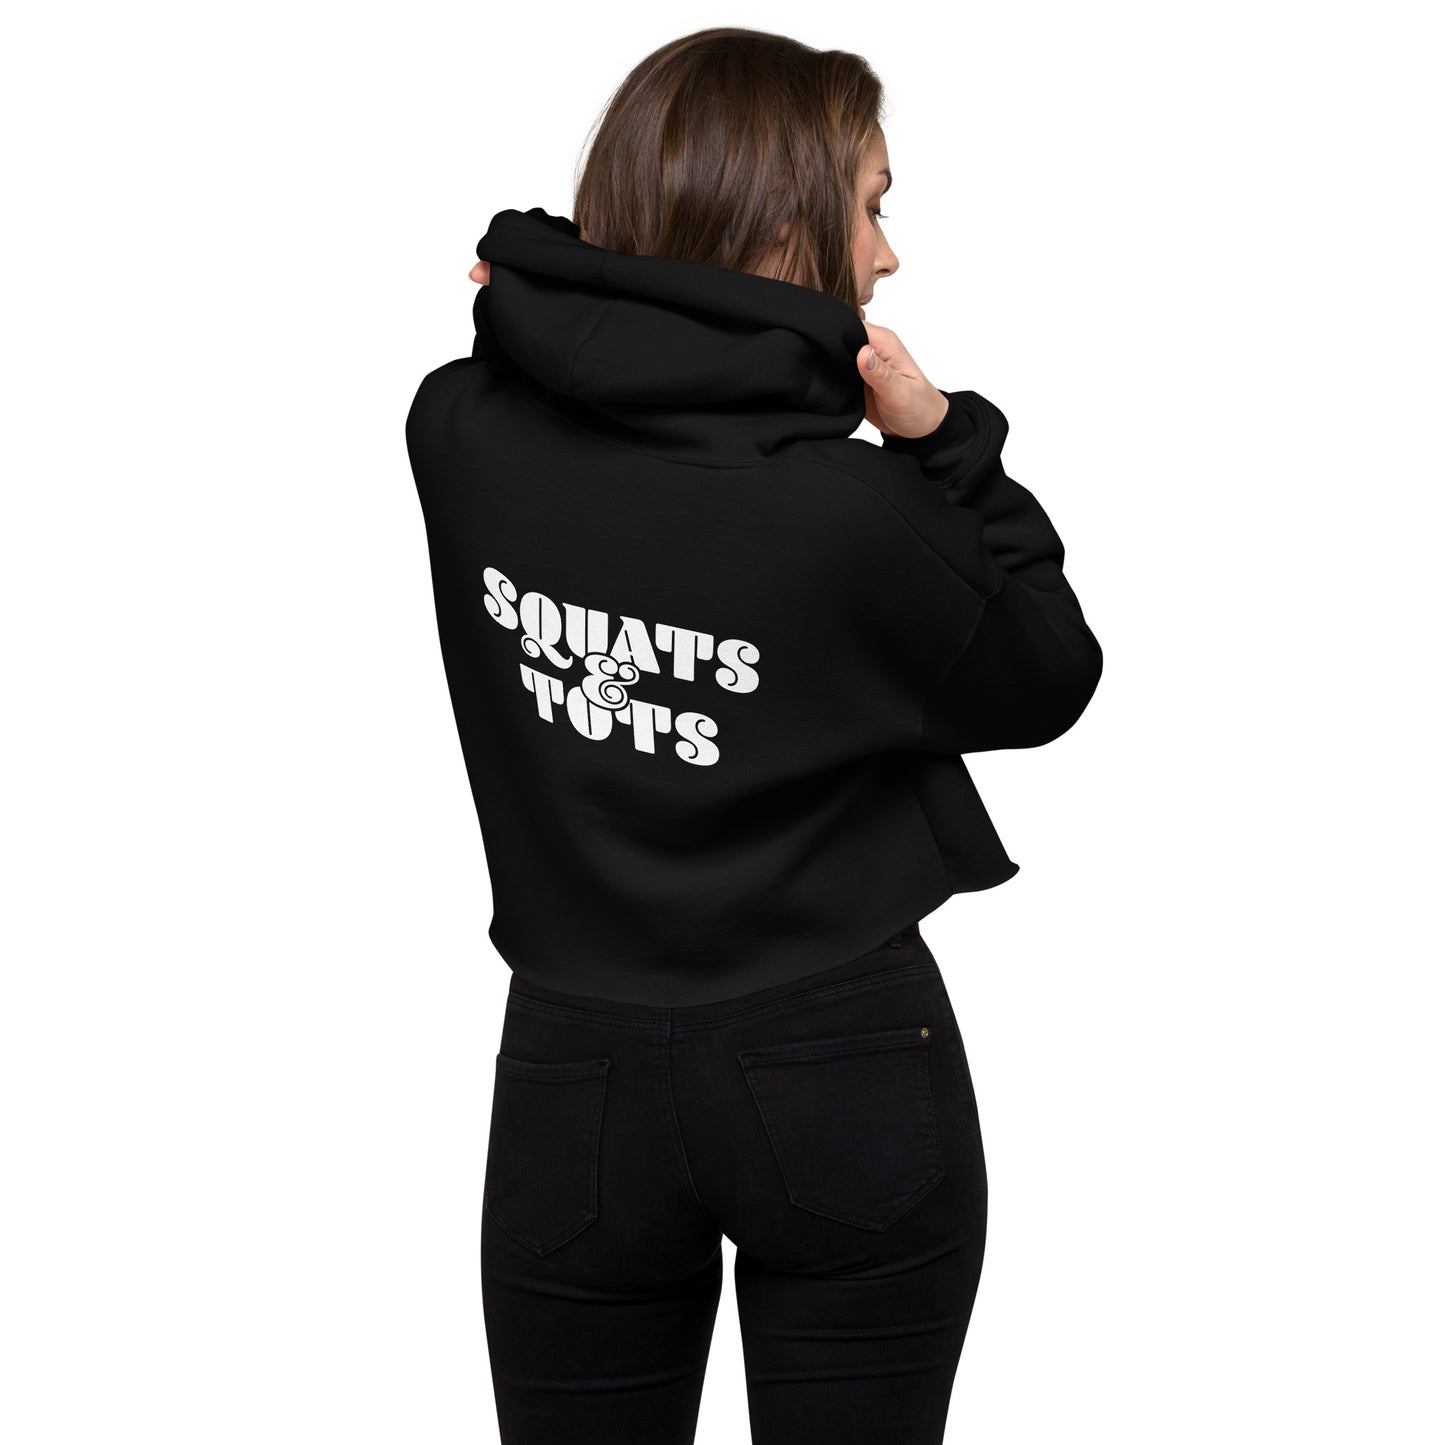 Squats and Tots Crop Hoodie